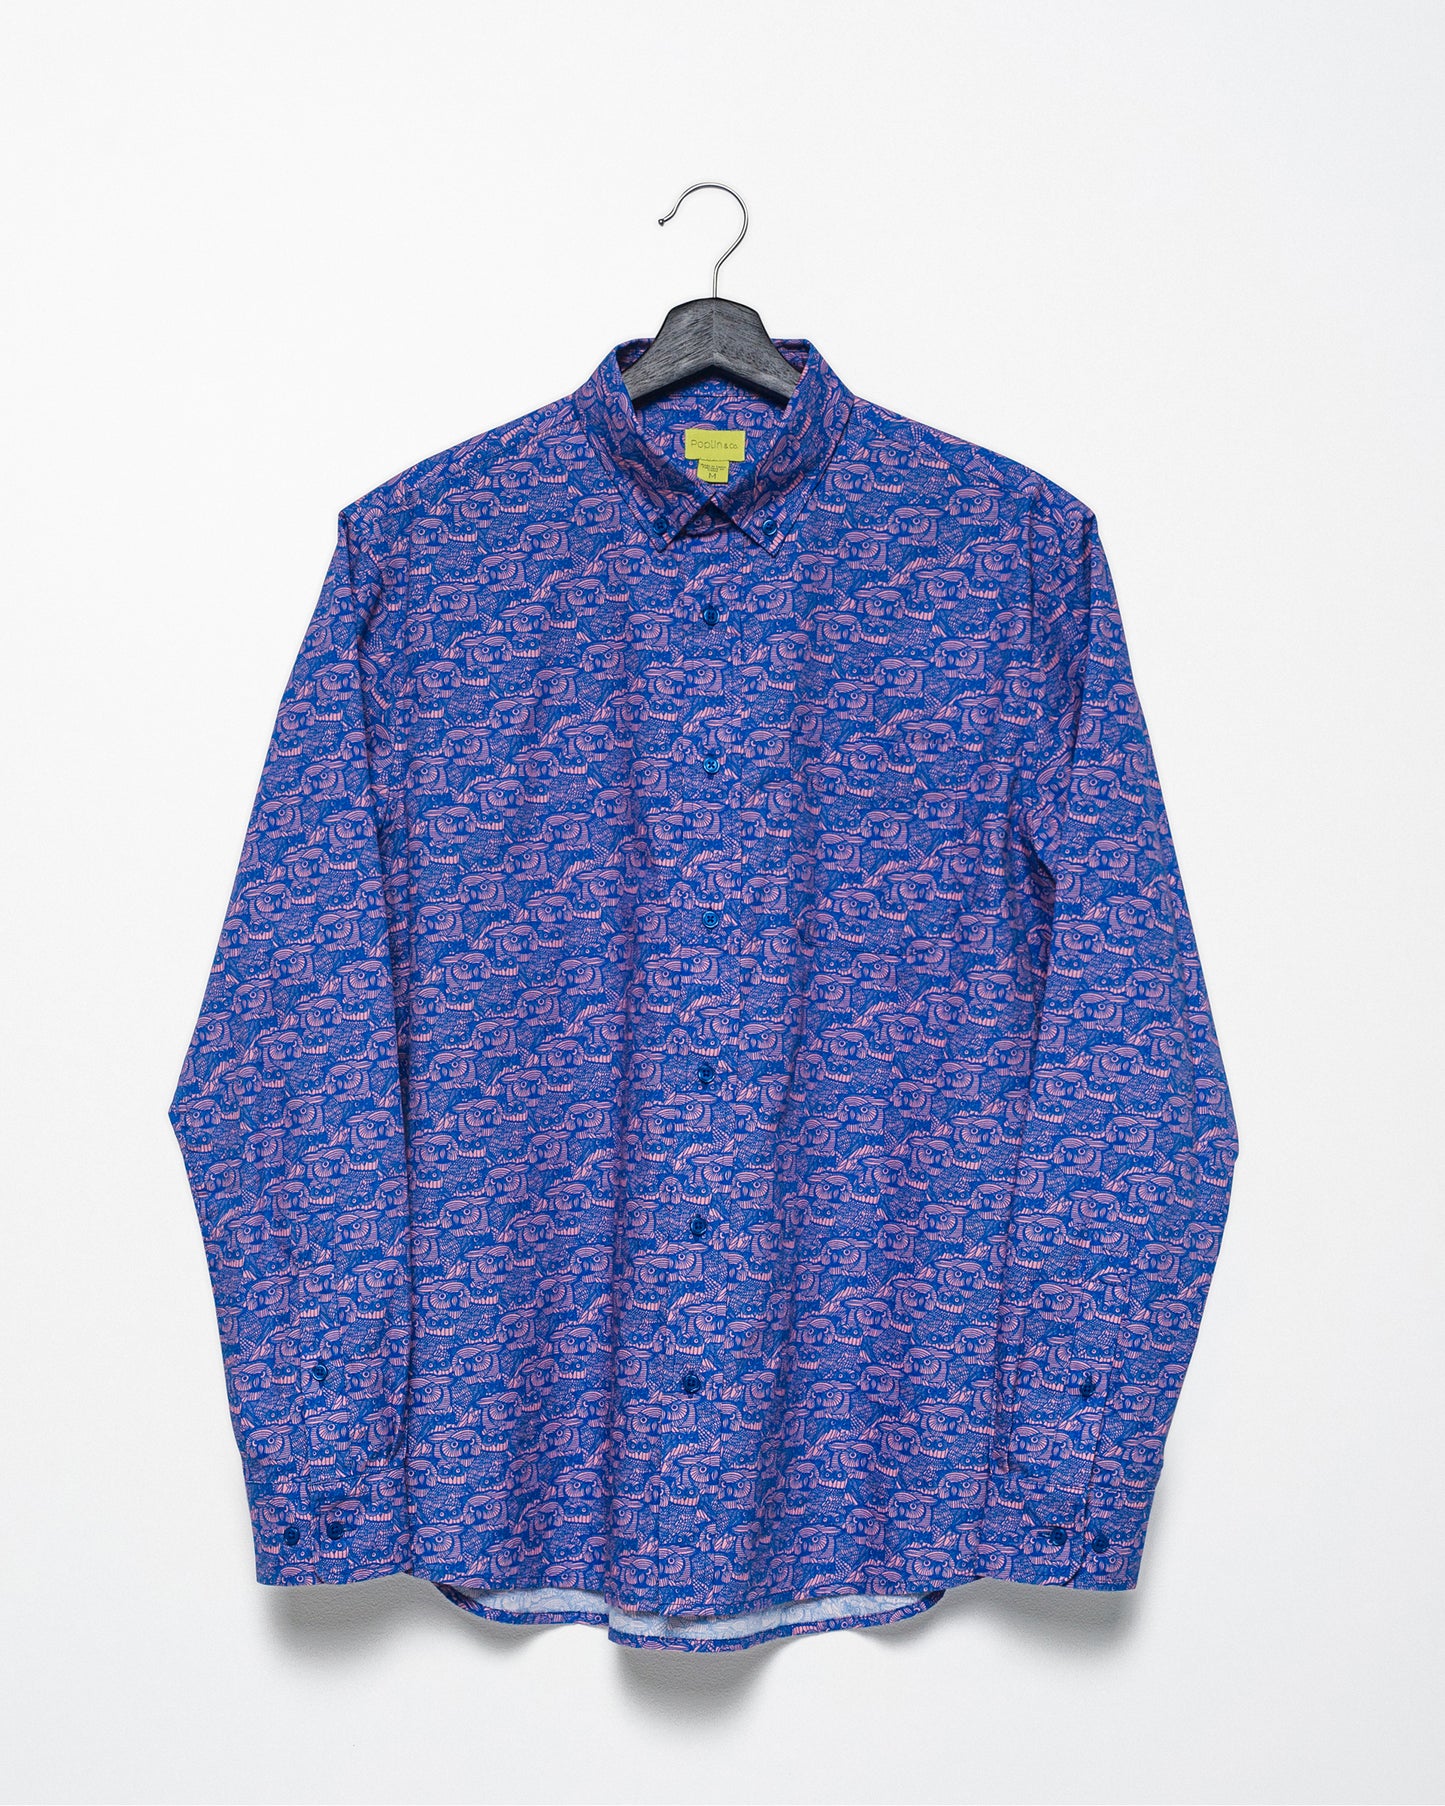 Wise Owl Printed Casual Button-Down Long Sleeve Shirt